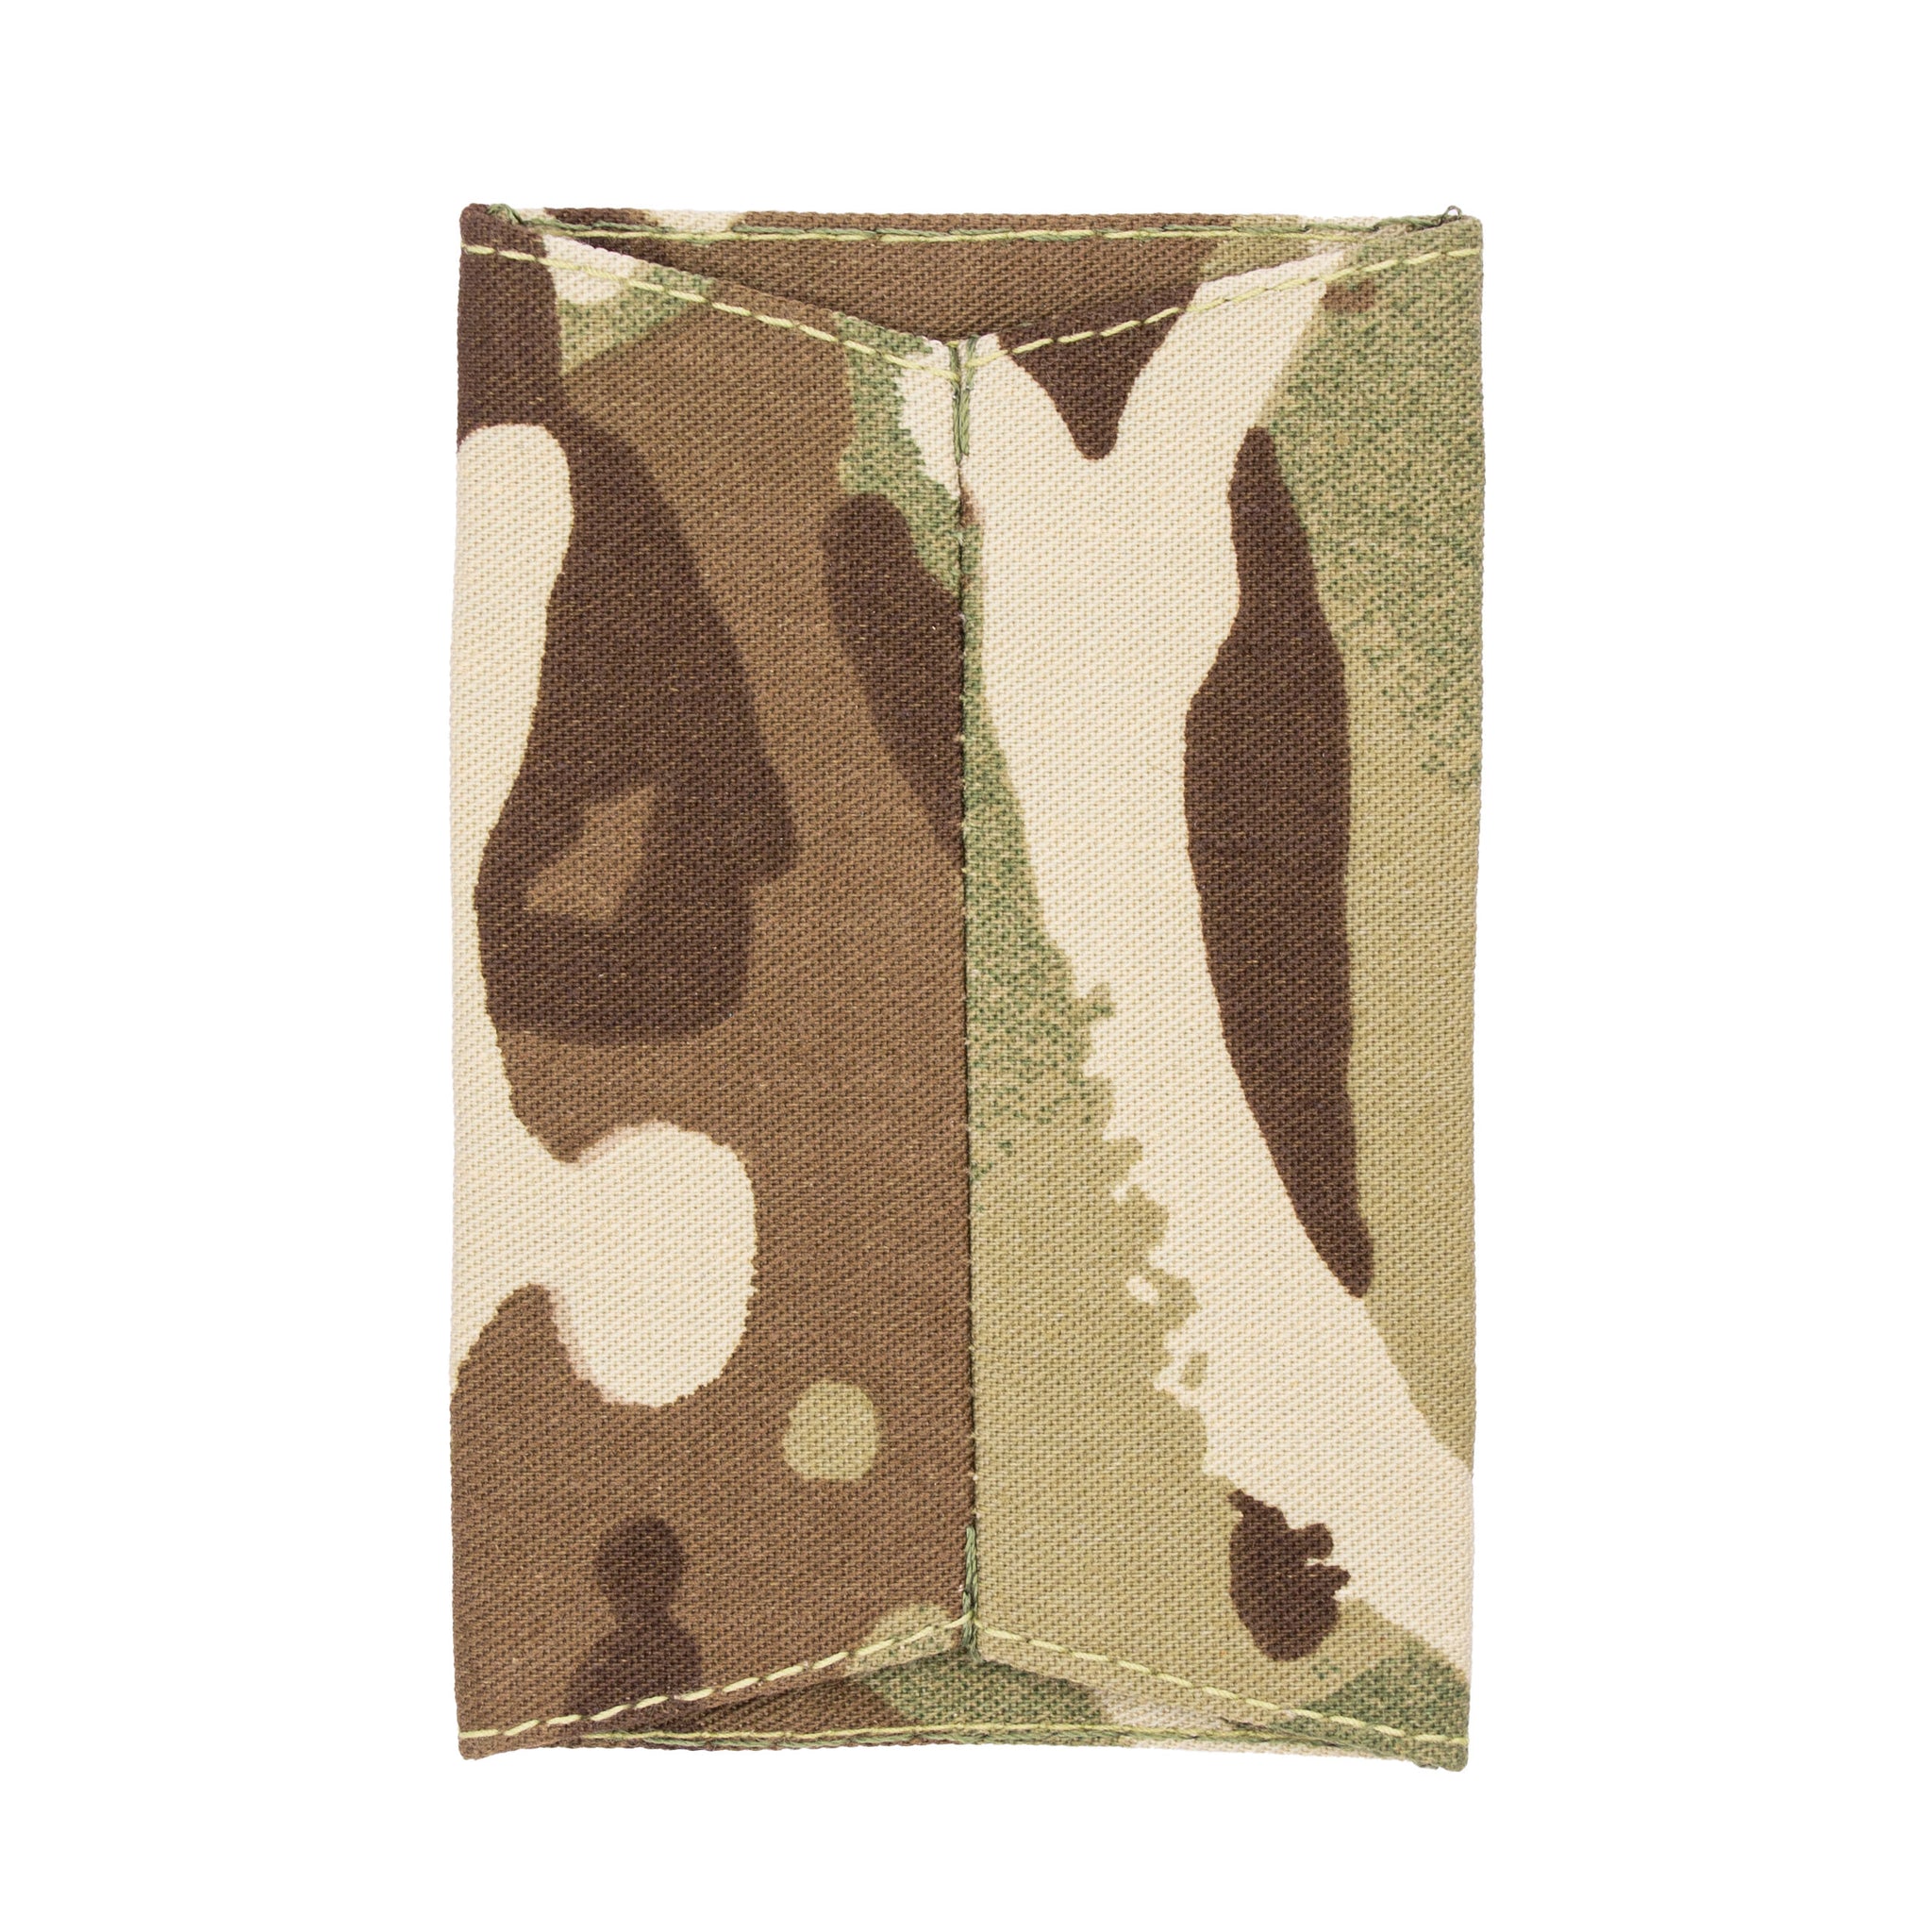 Colour Sergeant Slider Epaulette For The British Army Cadet Force (ACF)